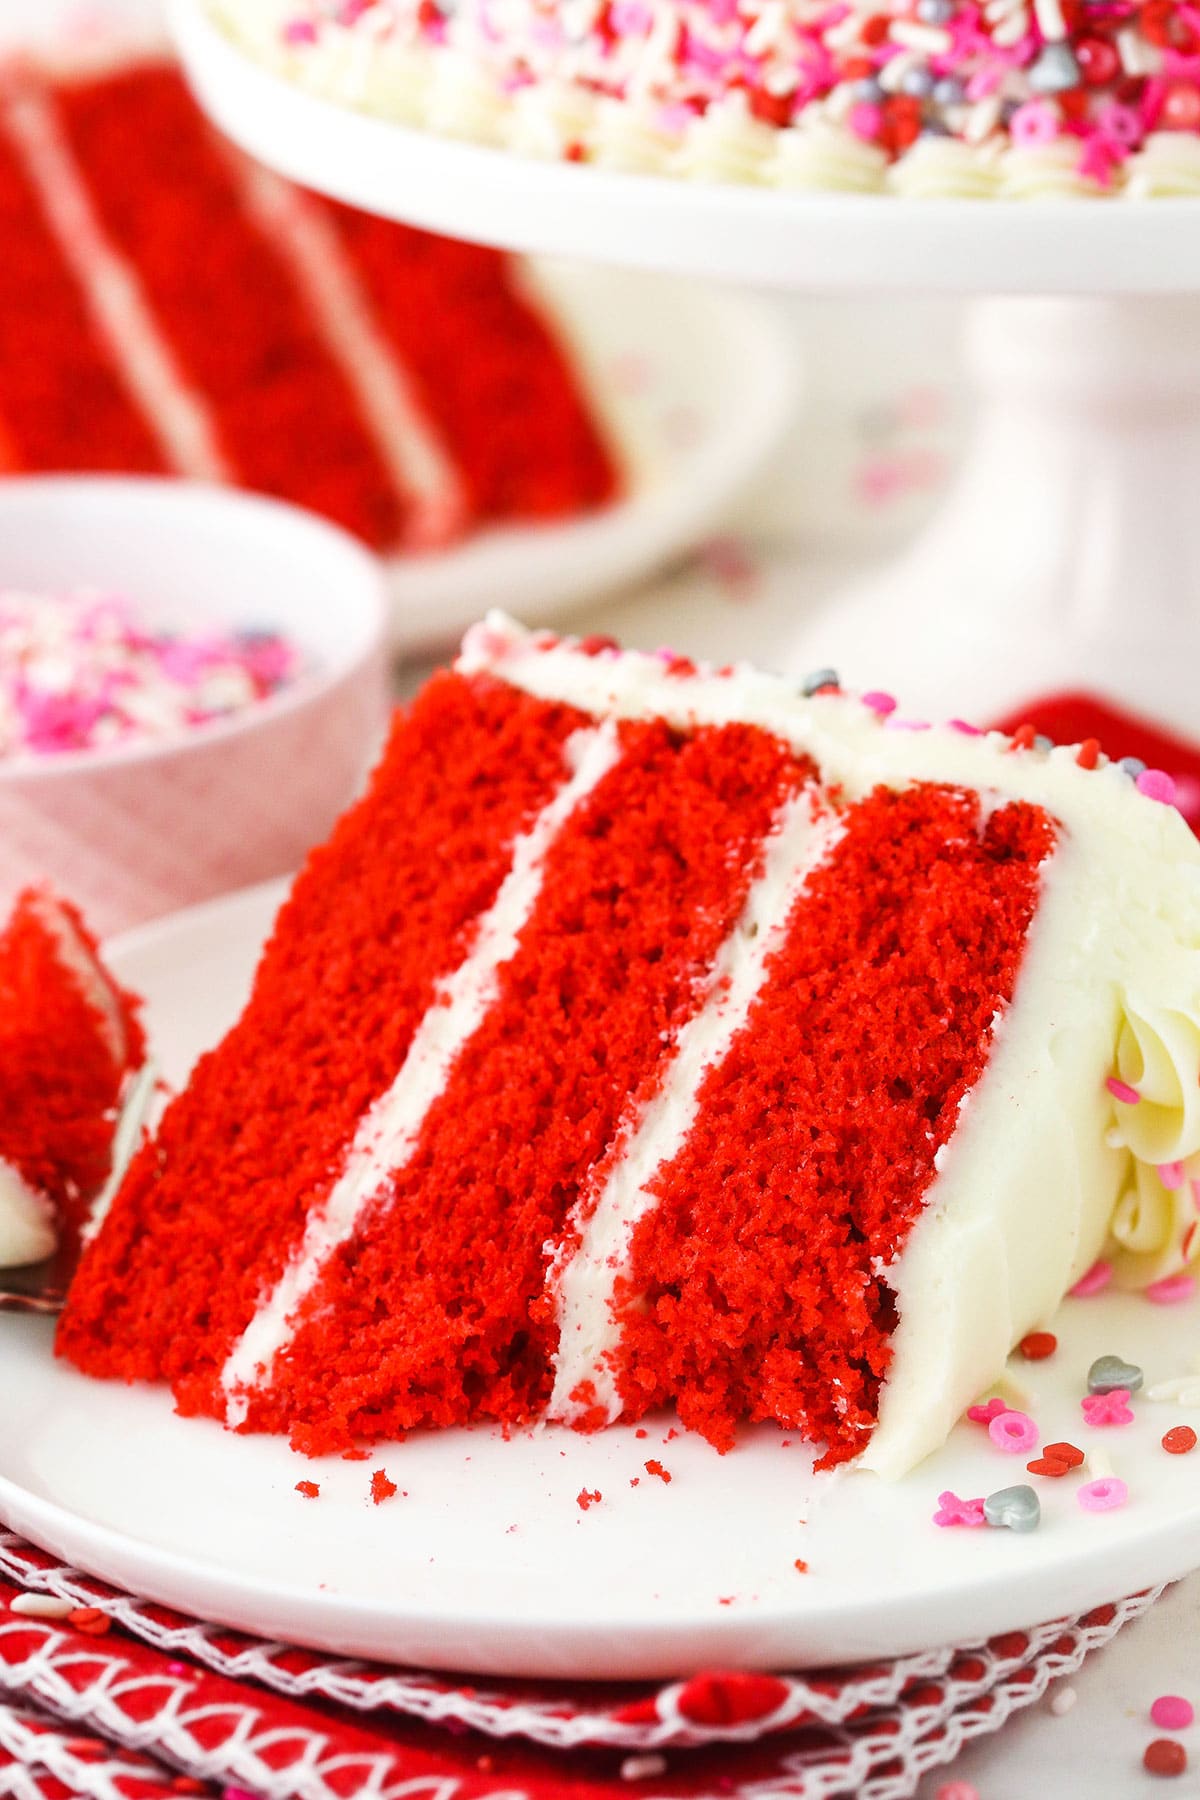 A slice of red velvet cake on a plate with one bite missing